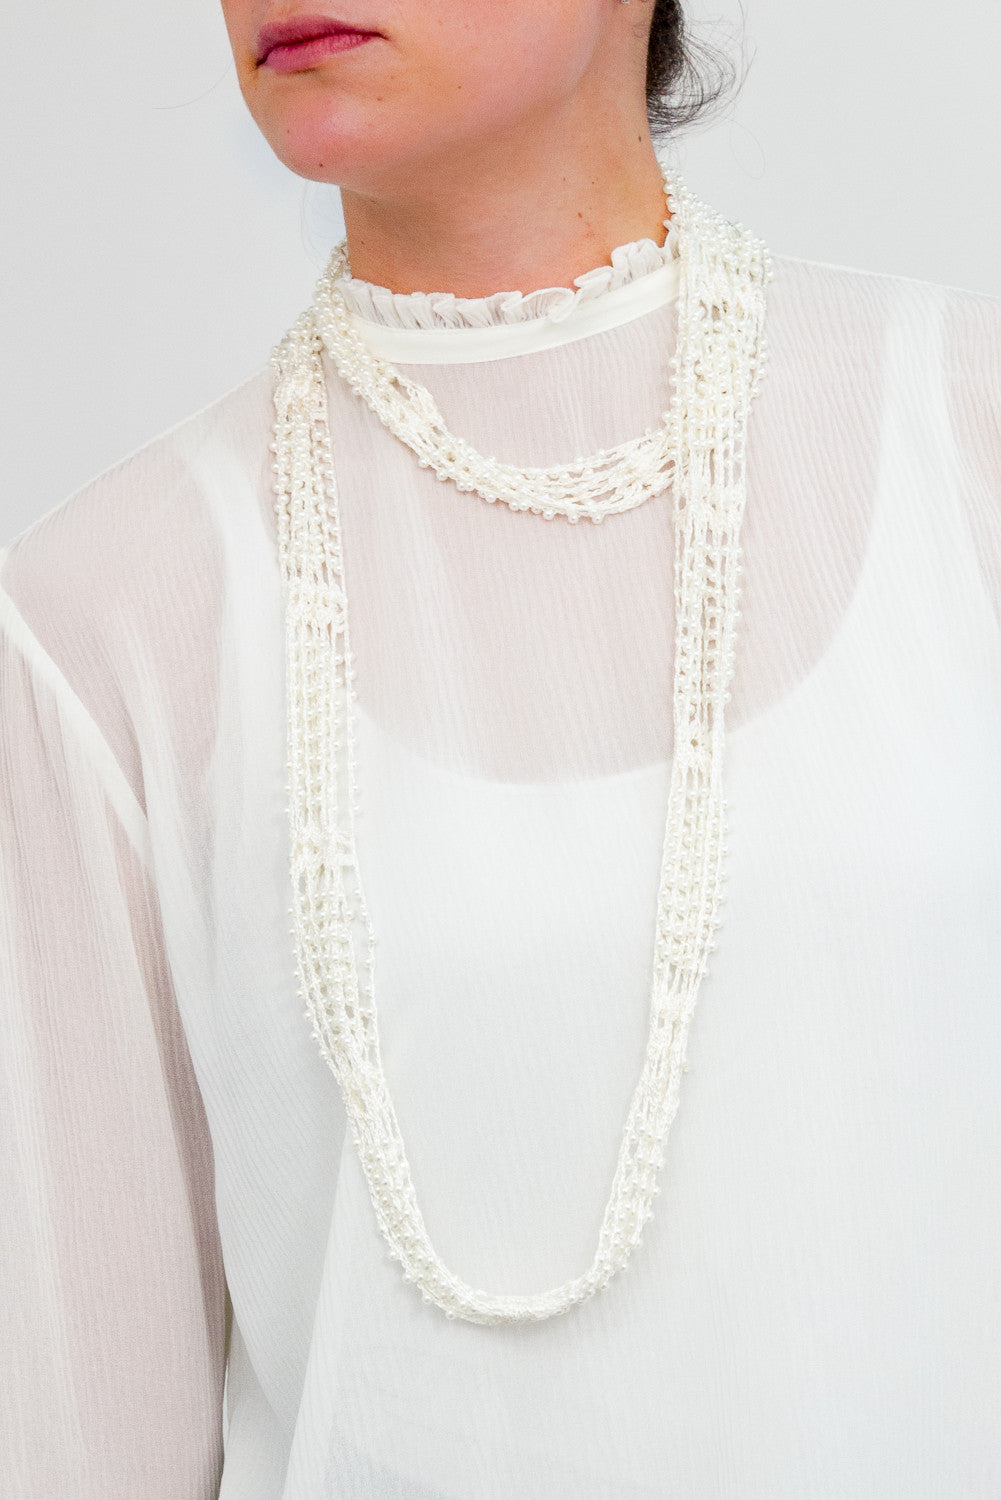 Crochet Pearl Necklace Scarf - Just Jamie